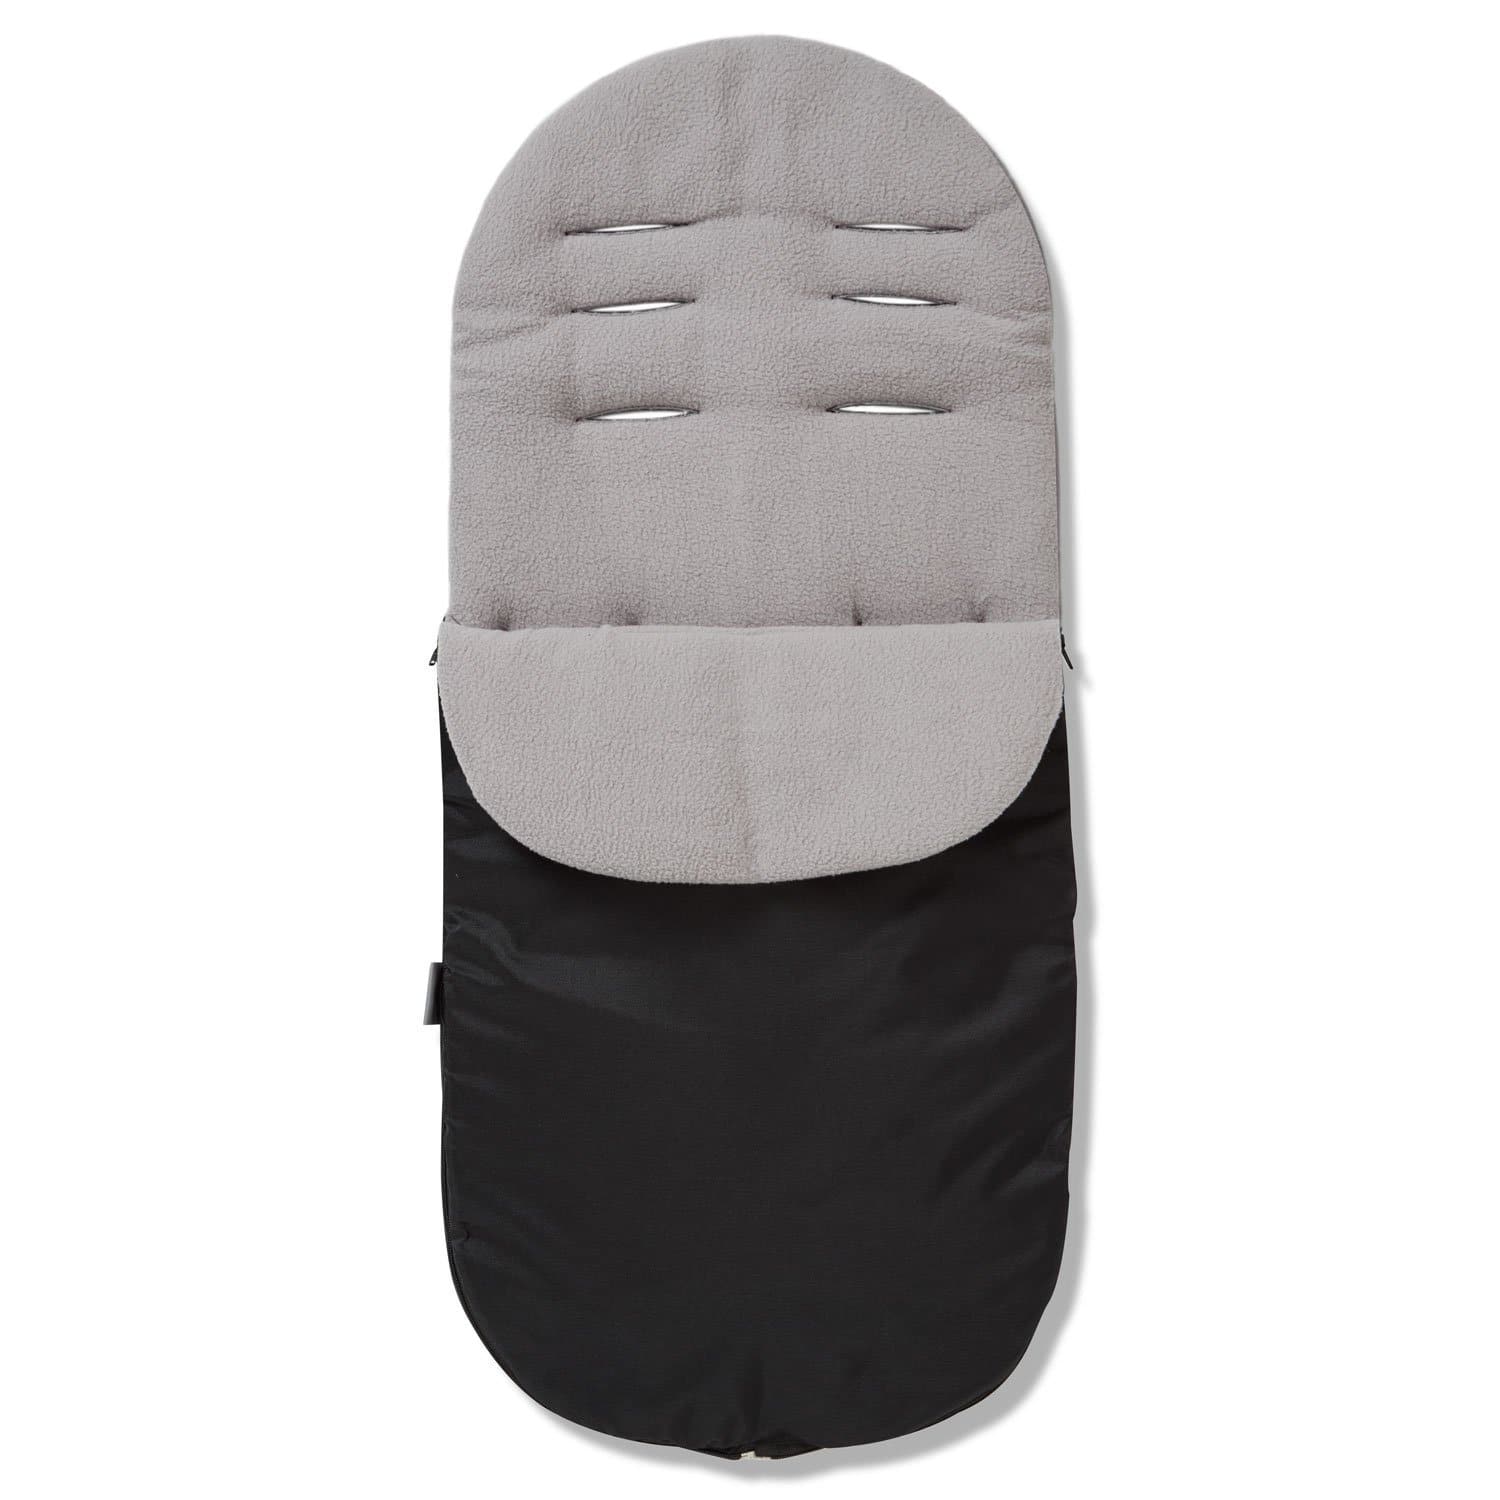 Footmuff / Cosy Toes Compatible with GB - Grey / Fits All Models | For Your Little One